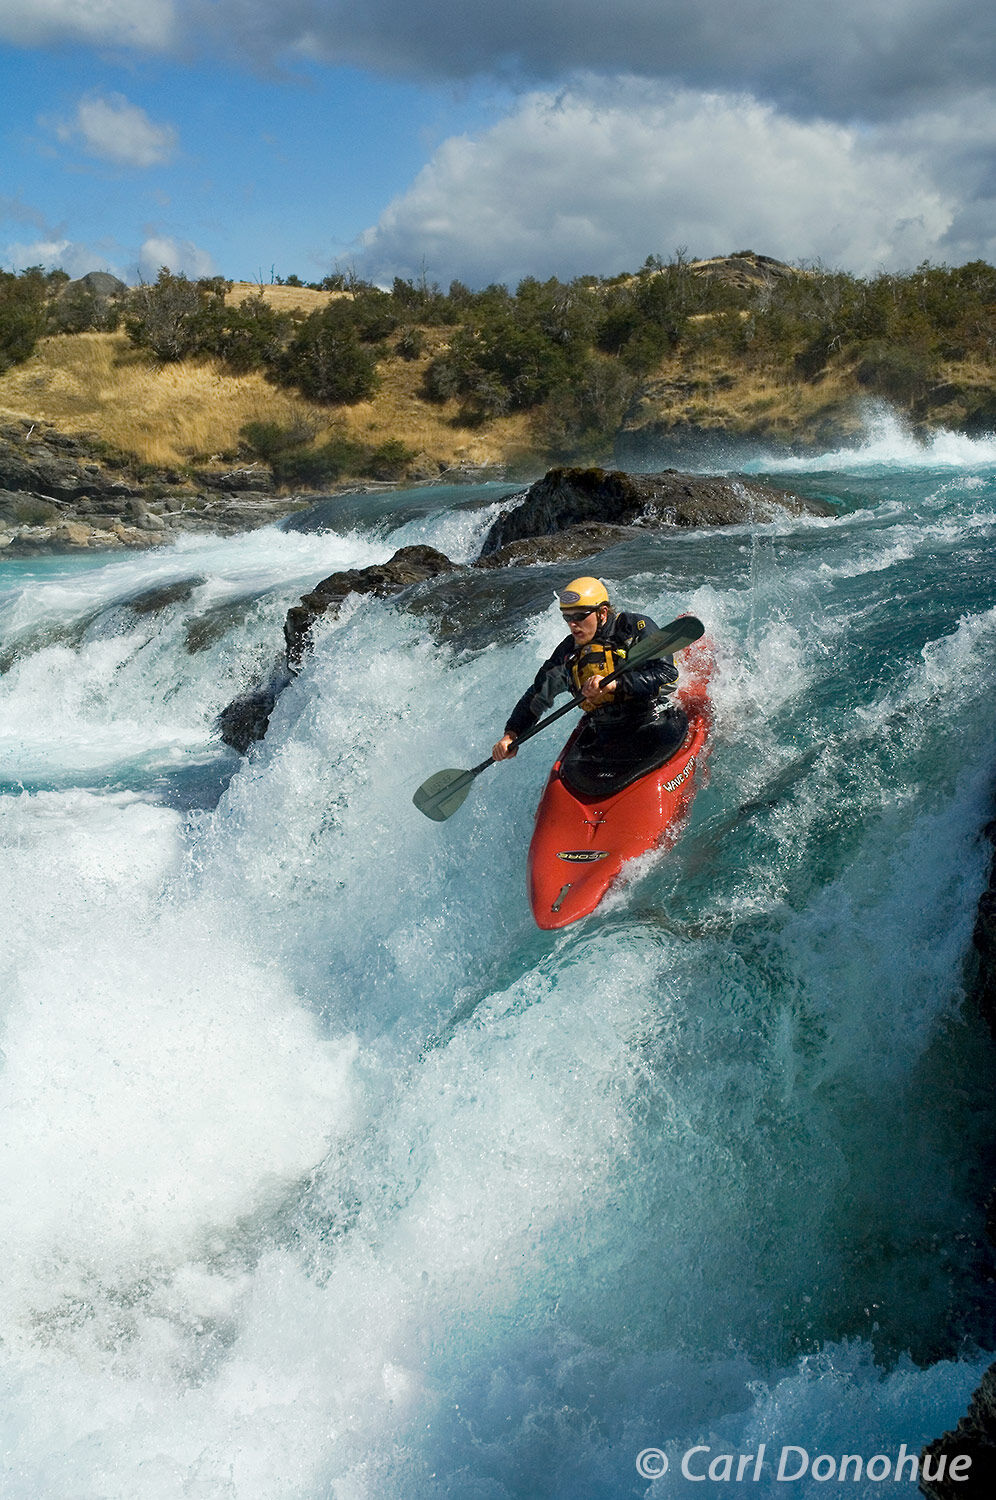 Whitewater kayaking on the Rio Baker, or Baker River, in southern Patagonia, Chile offers some of the best whitewater kayaking...